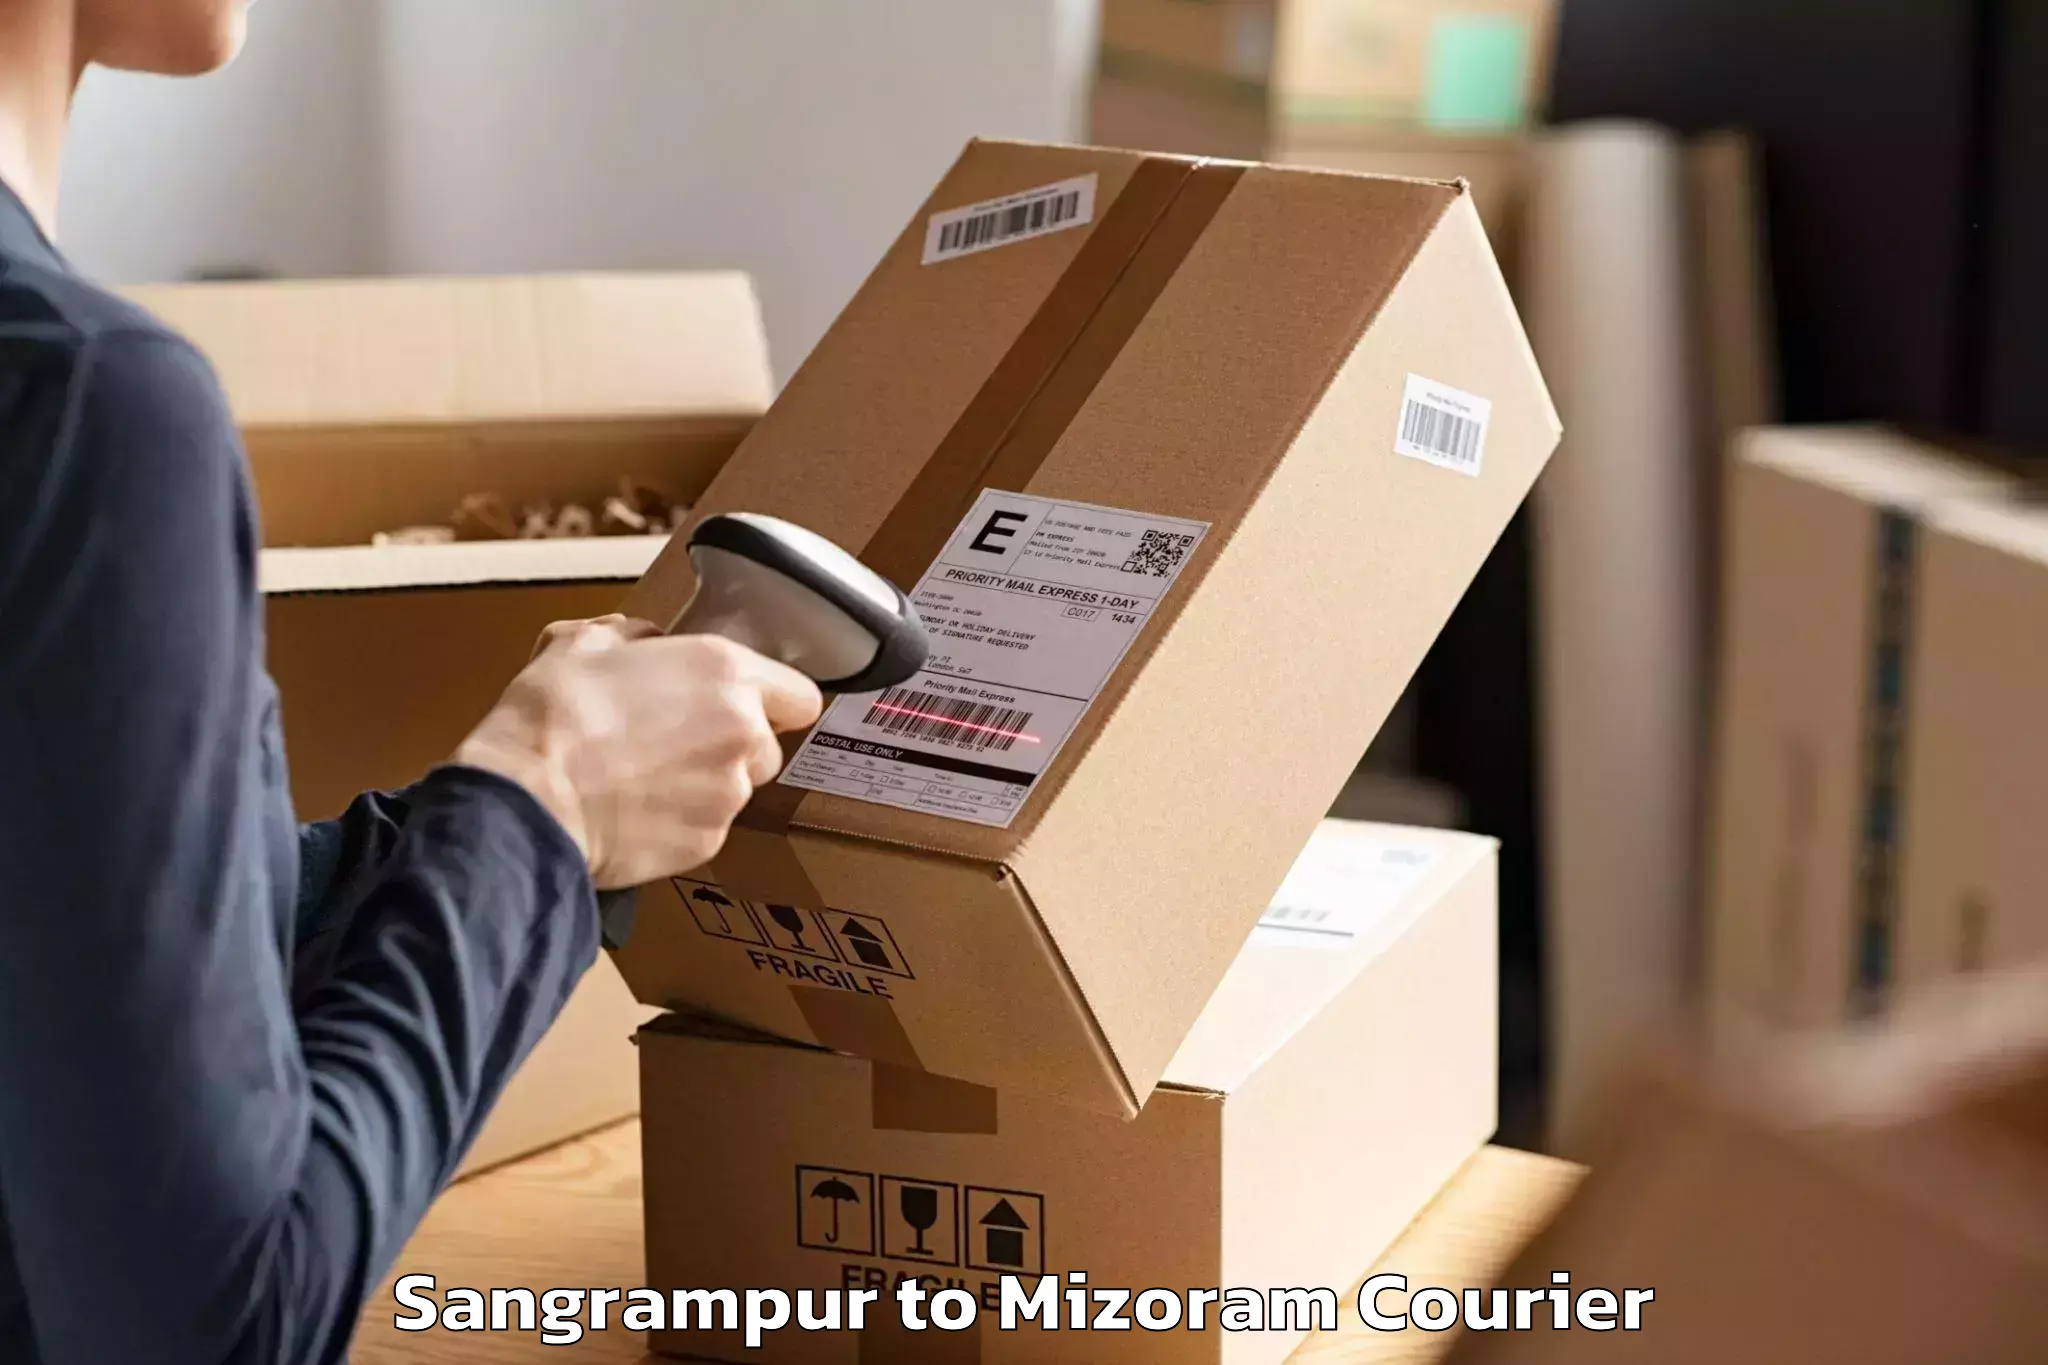 Moving and packing experts Sangrampur to Aizawl